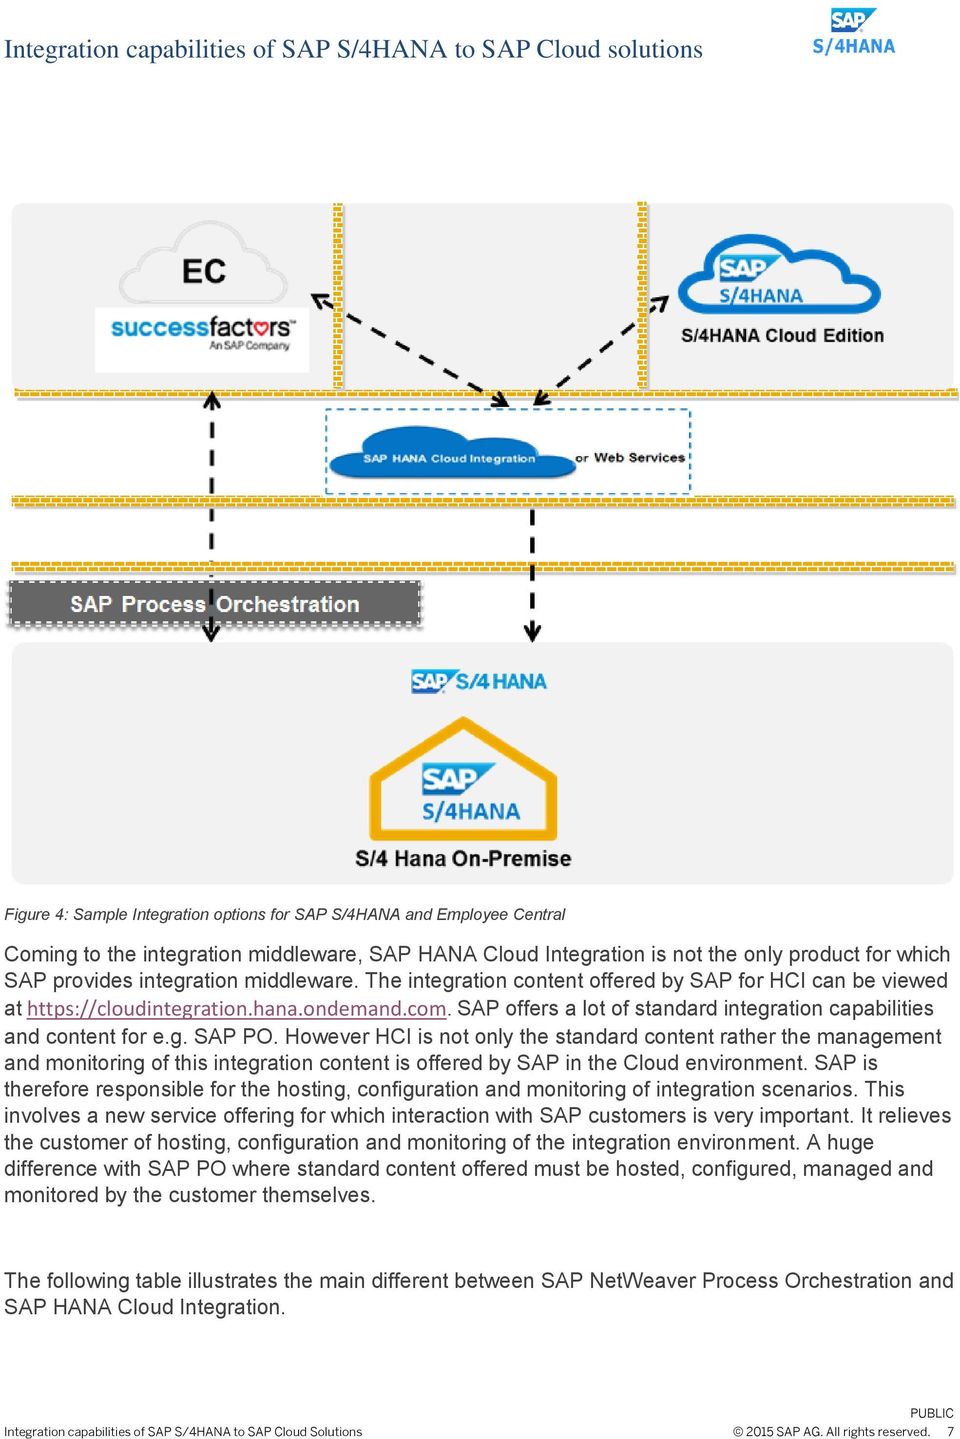 However HCI is not only the standard content rather the management and monitoring of this integration content is offered by SAP in the Cloud environment.